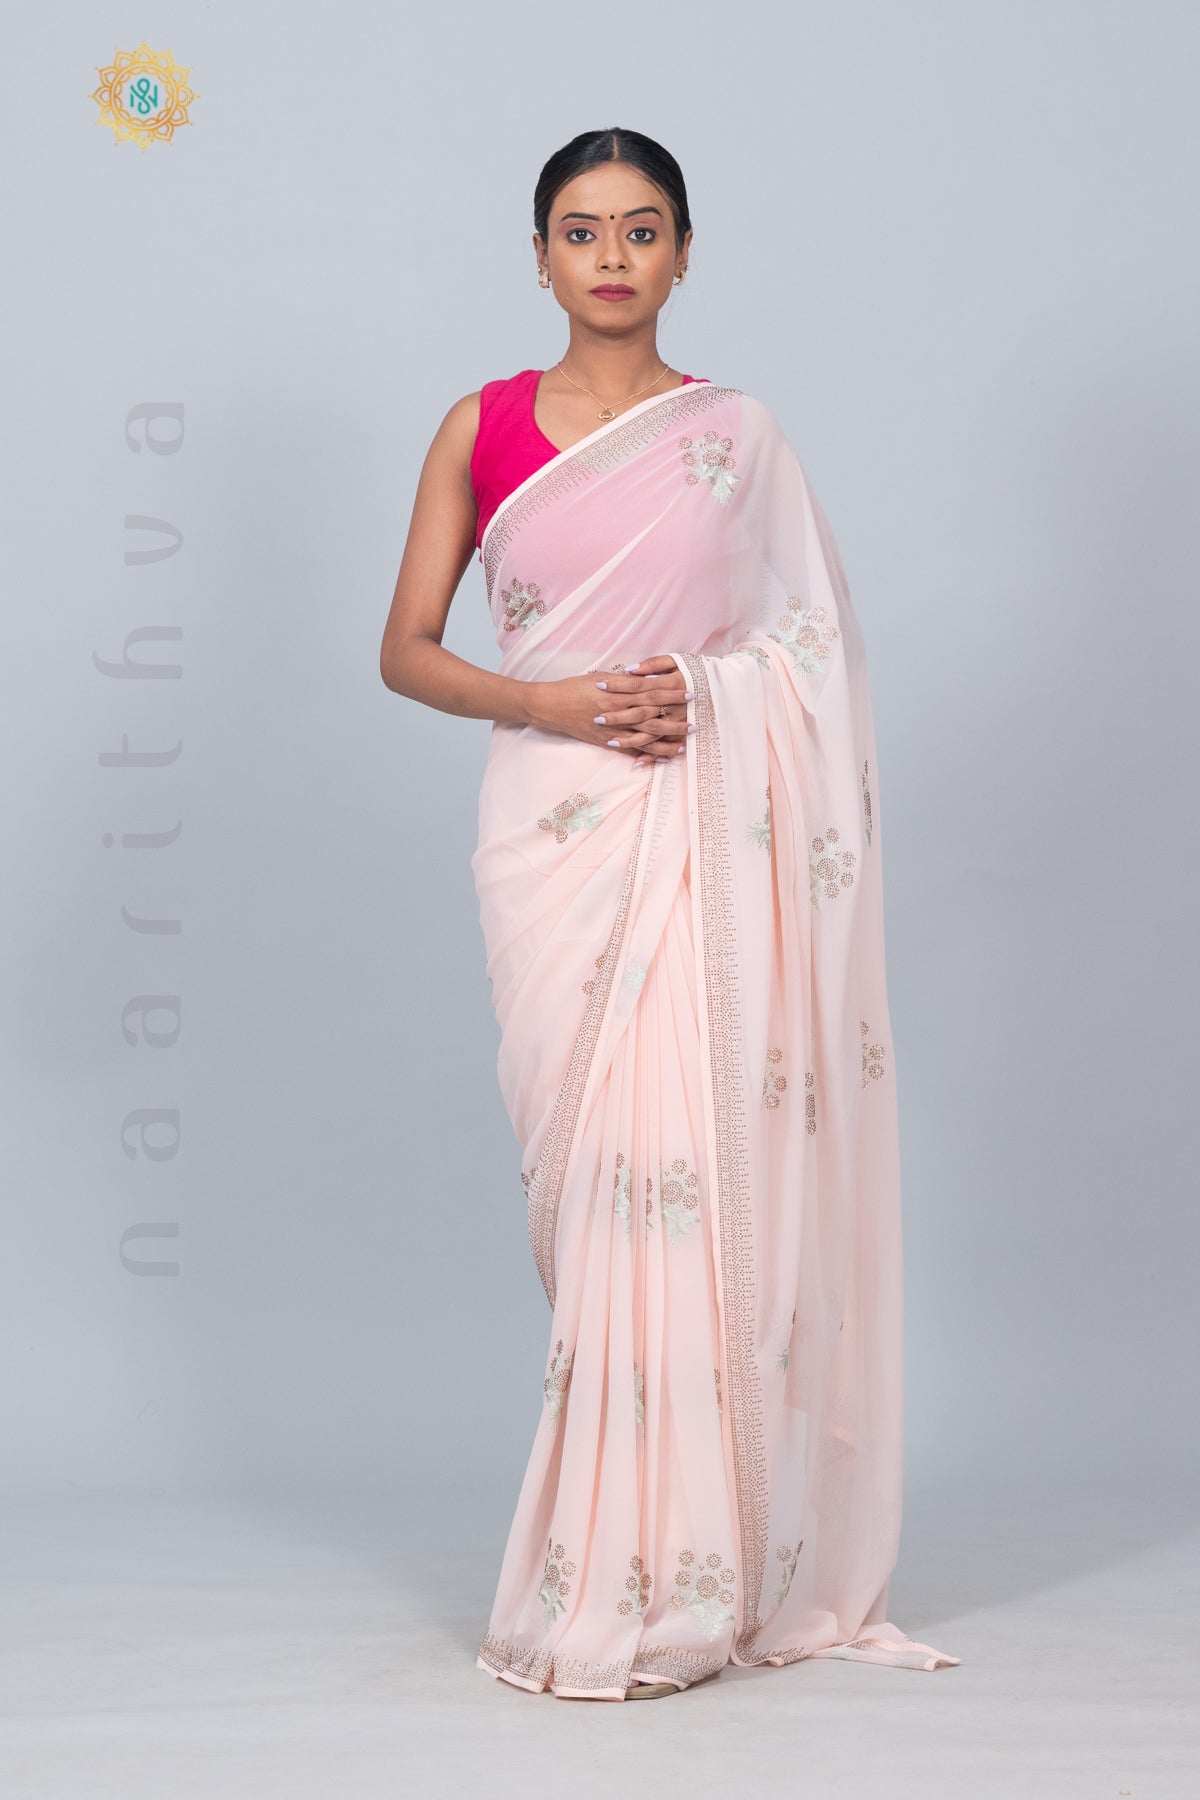 BABY PINK - DESIGNER GEORGETTE SAREE WITH STONE WORK & EMBROIDERY